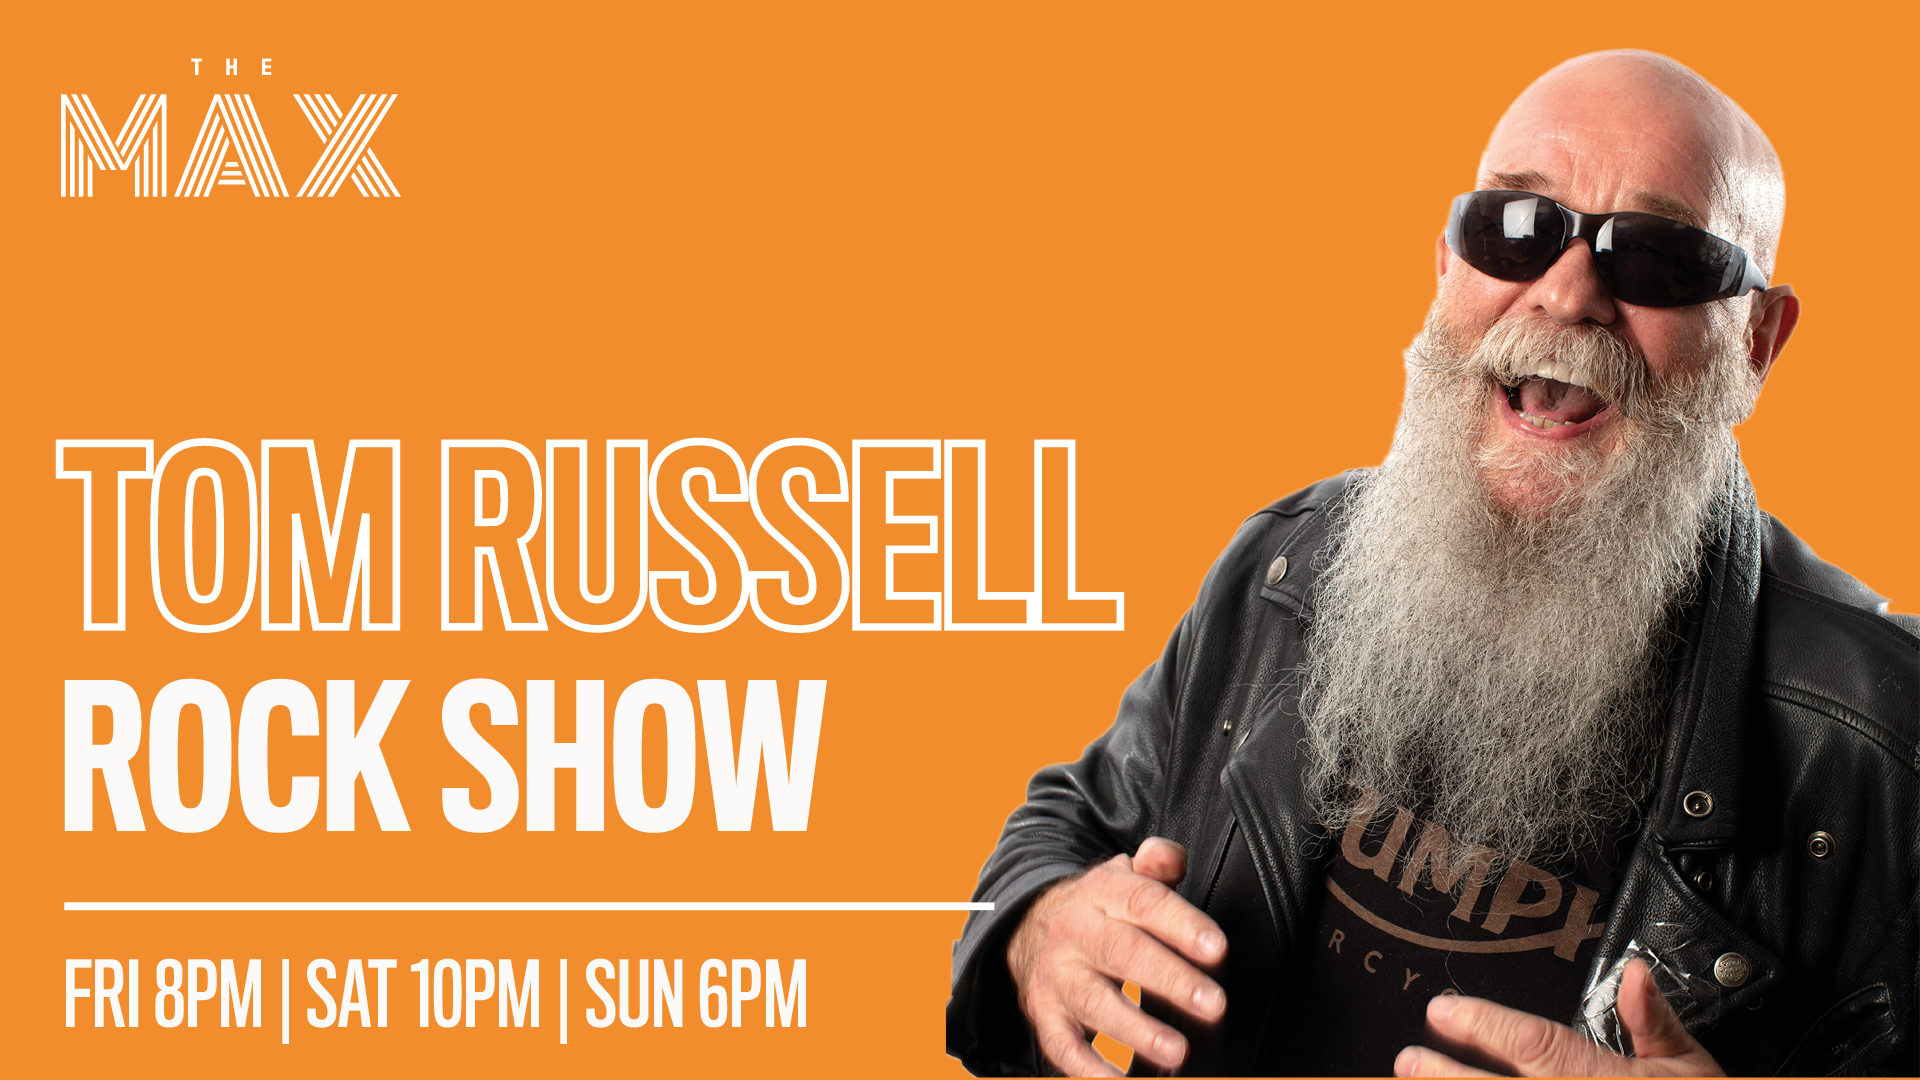 The Tom Russell Rock Show